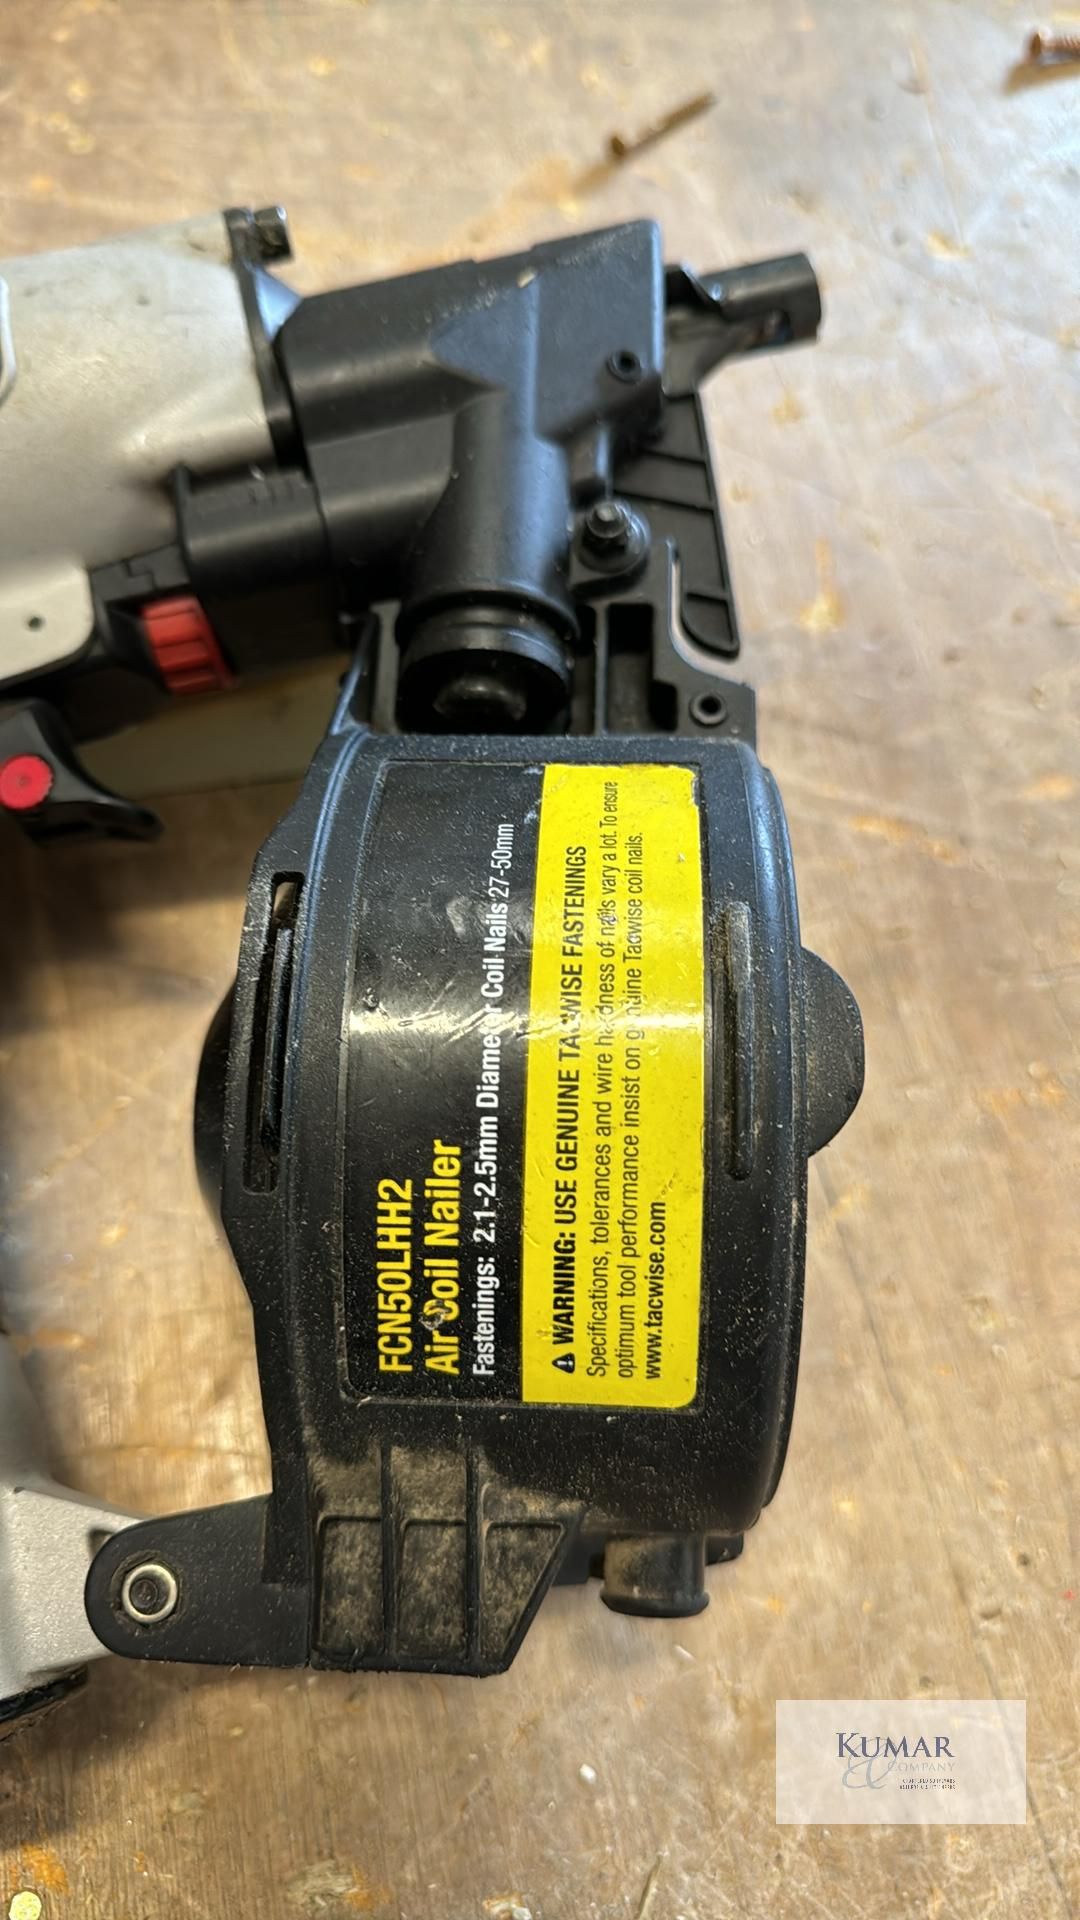 Tacwise FCN50LHH 50mm Air Coil Nailer RRP £299 - Image 5 of 7